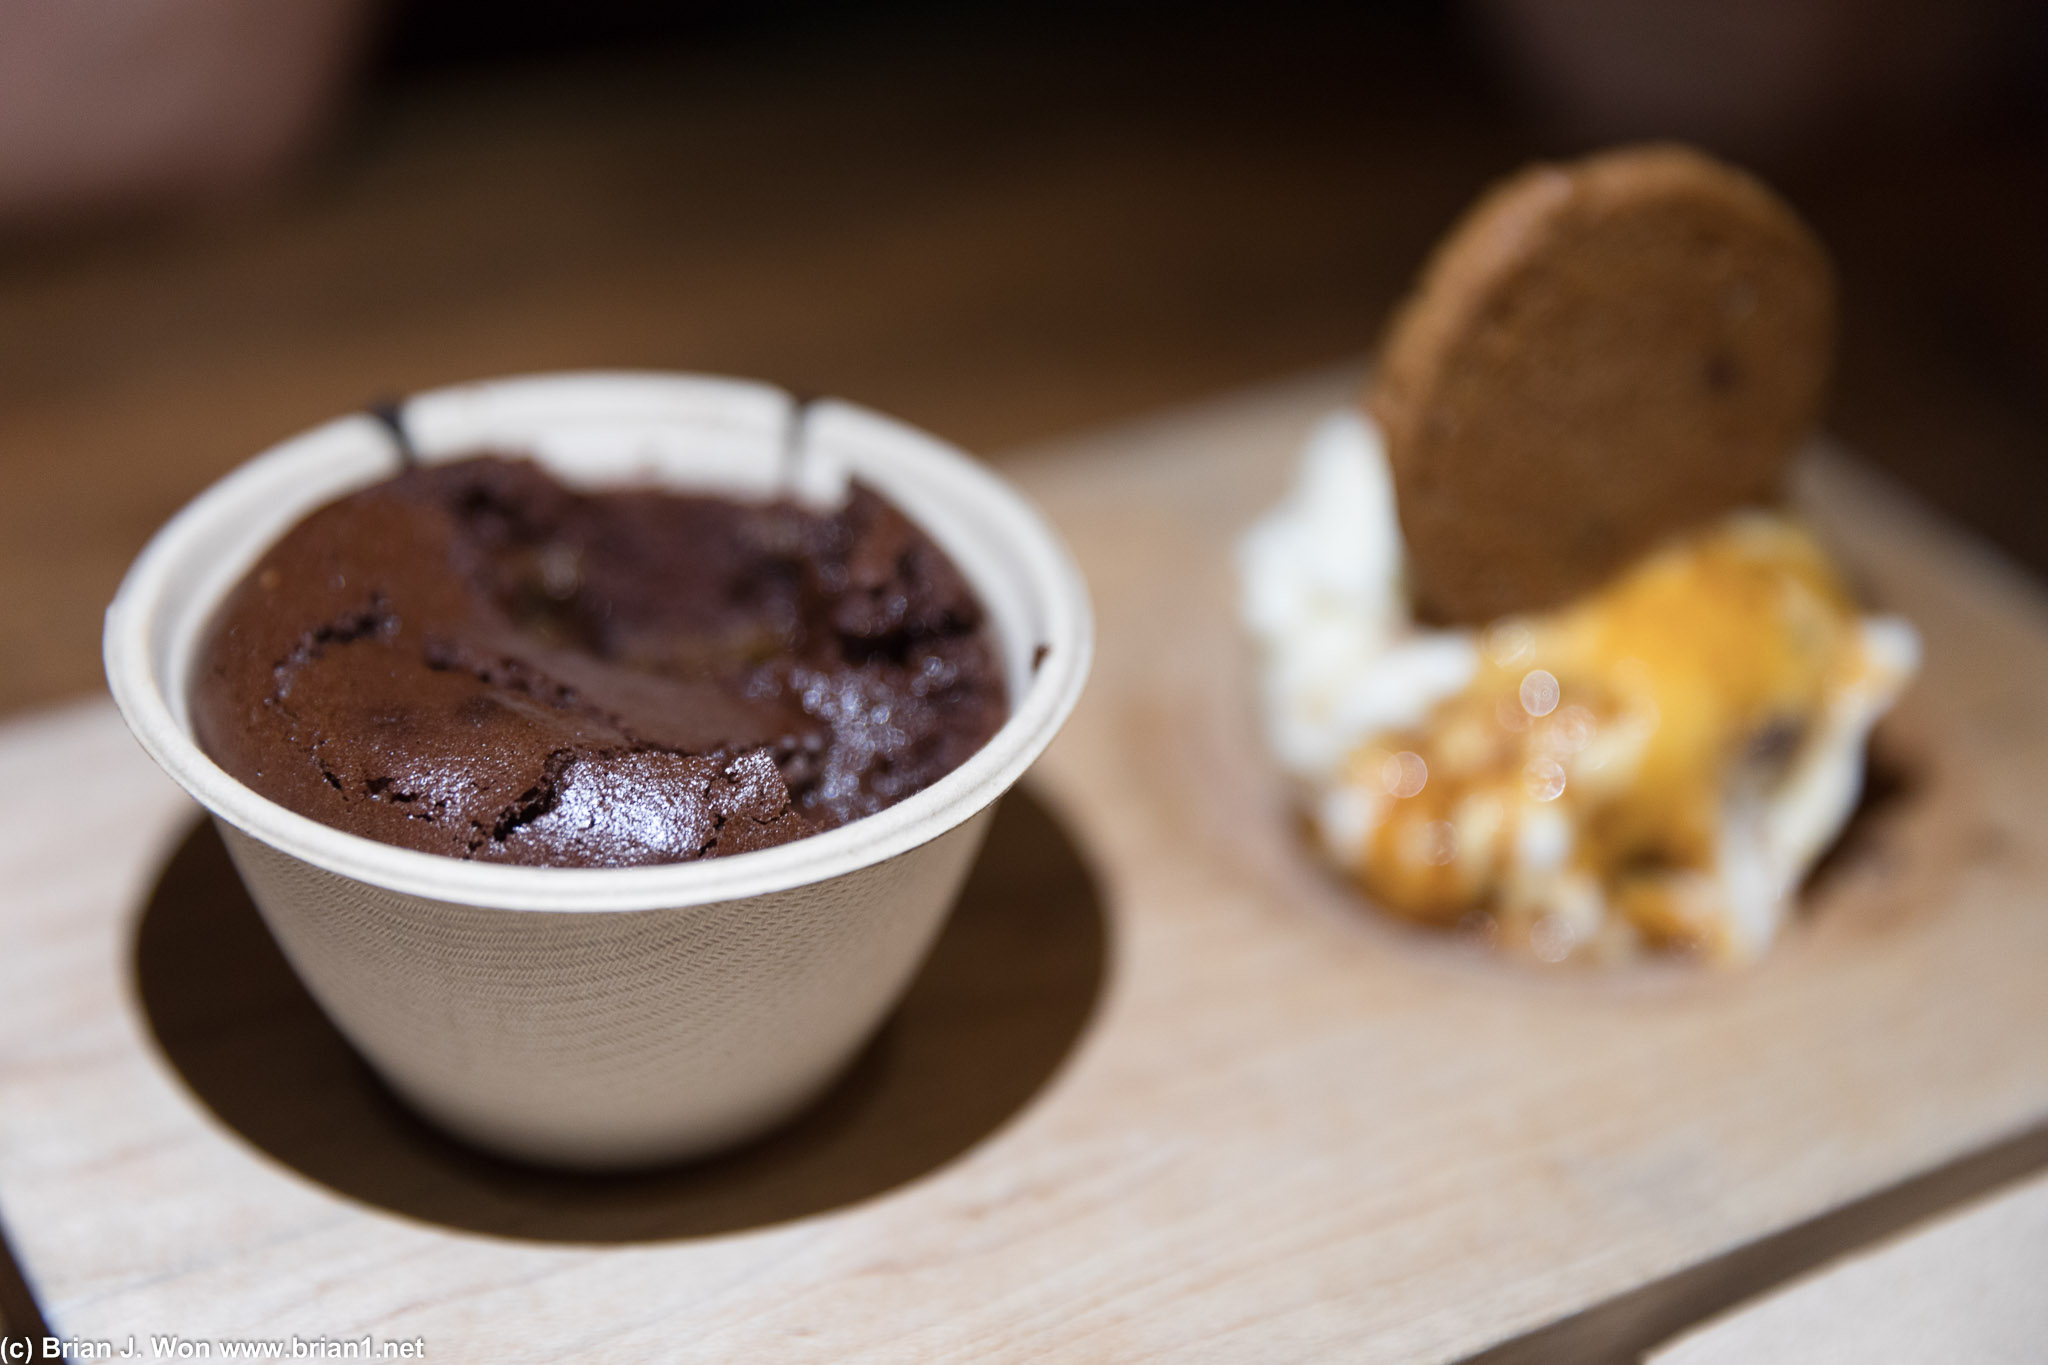 Molten chocolate cake is the thing to get here.